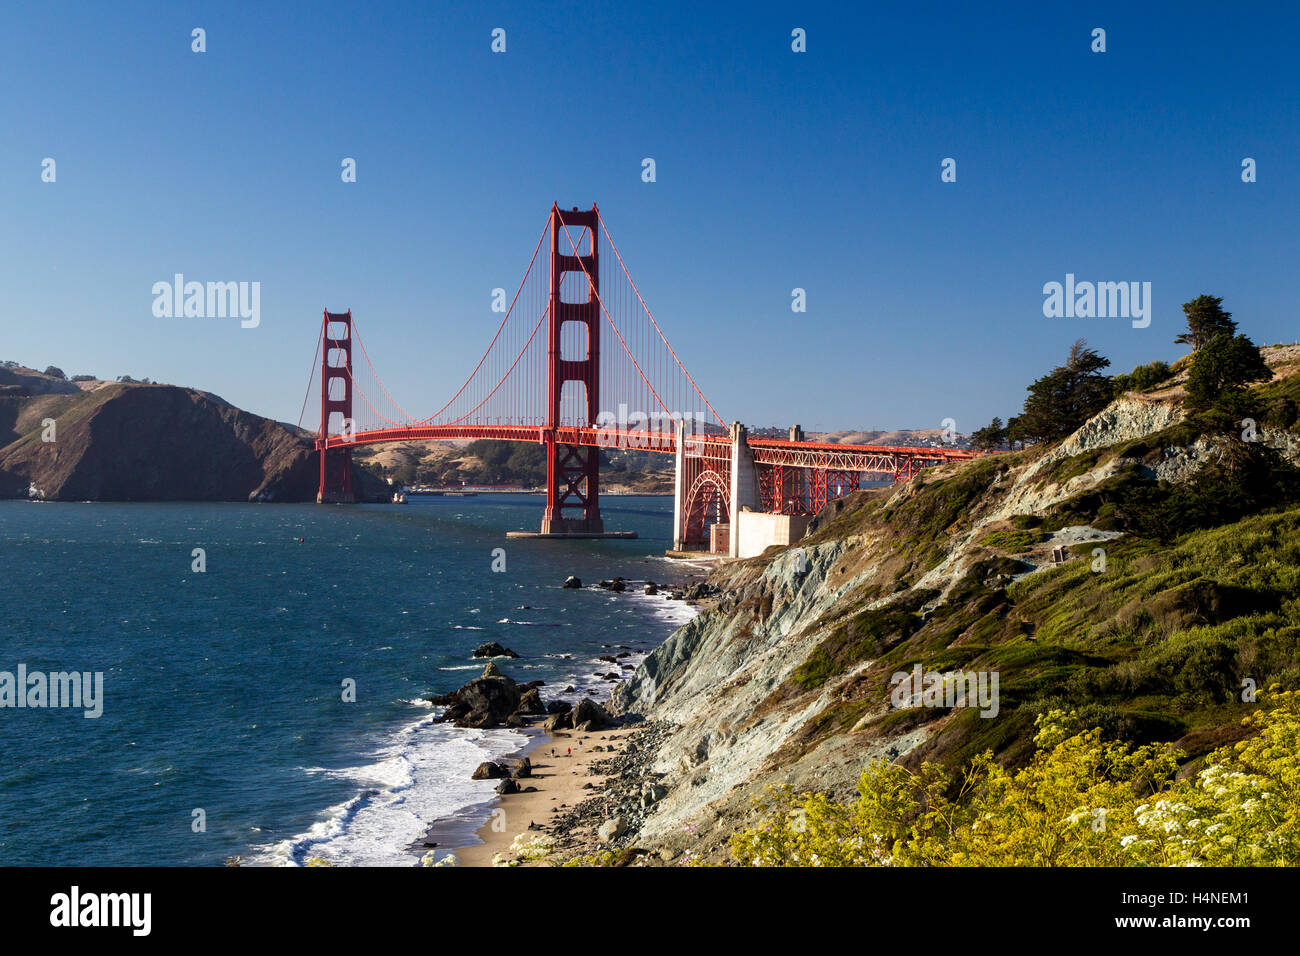 View from Marshalls Beach on the Golden Gate Bridge in San Francisco, California, USA on a cloudless evening. Stock Photo